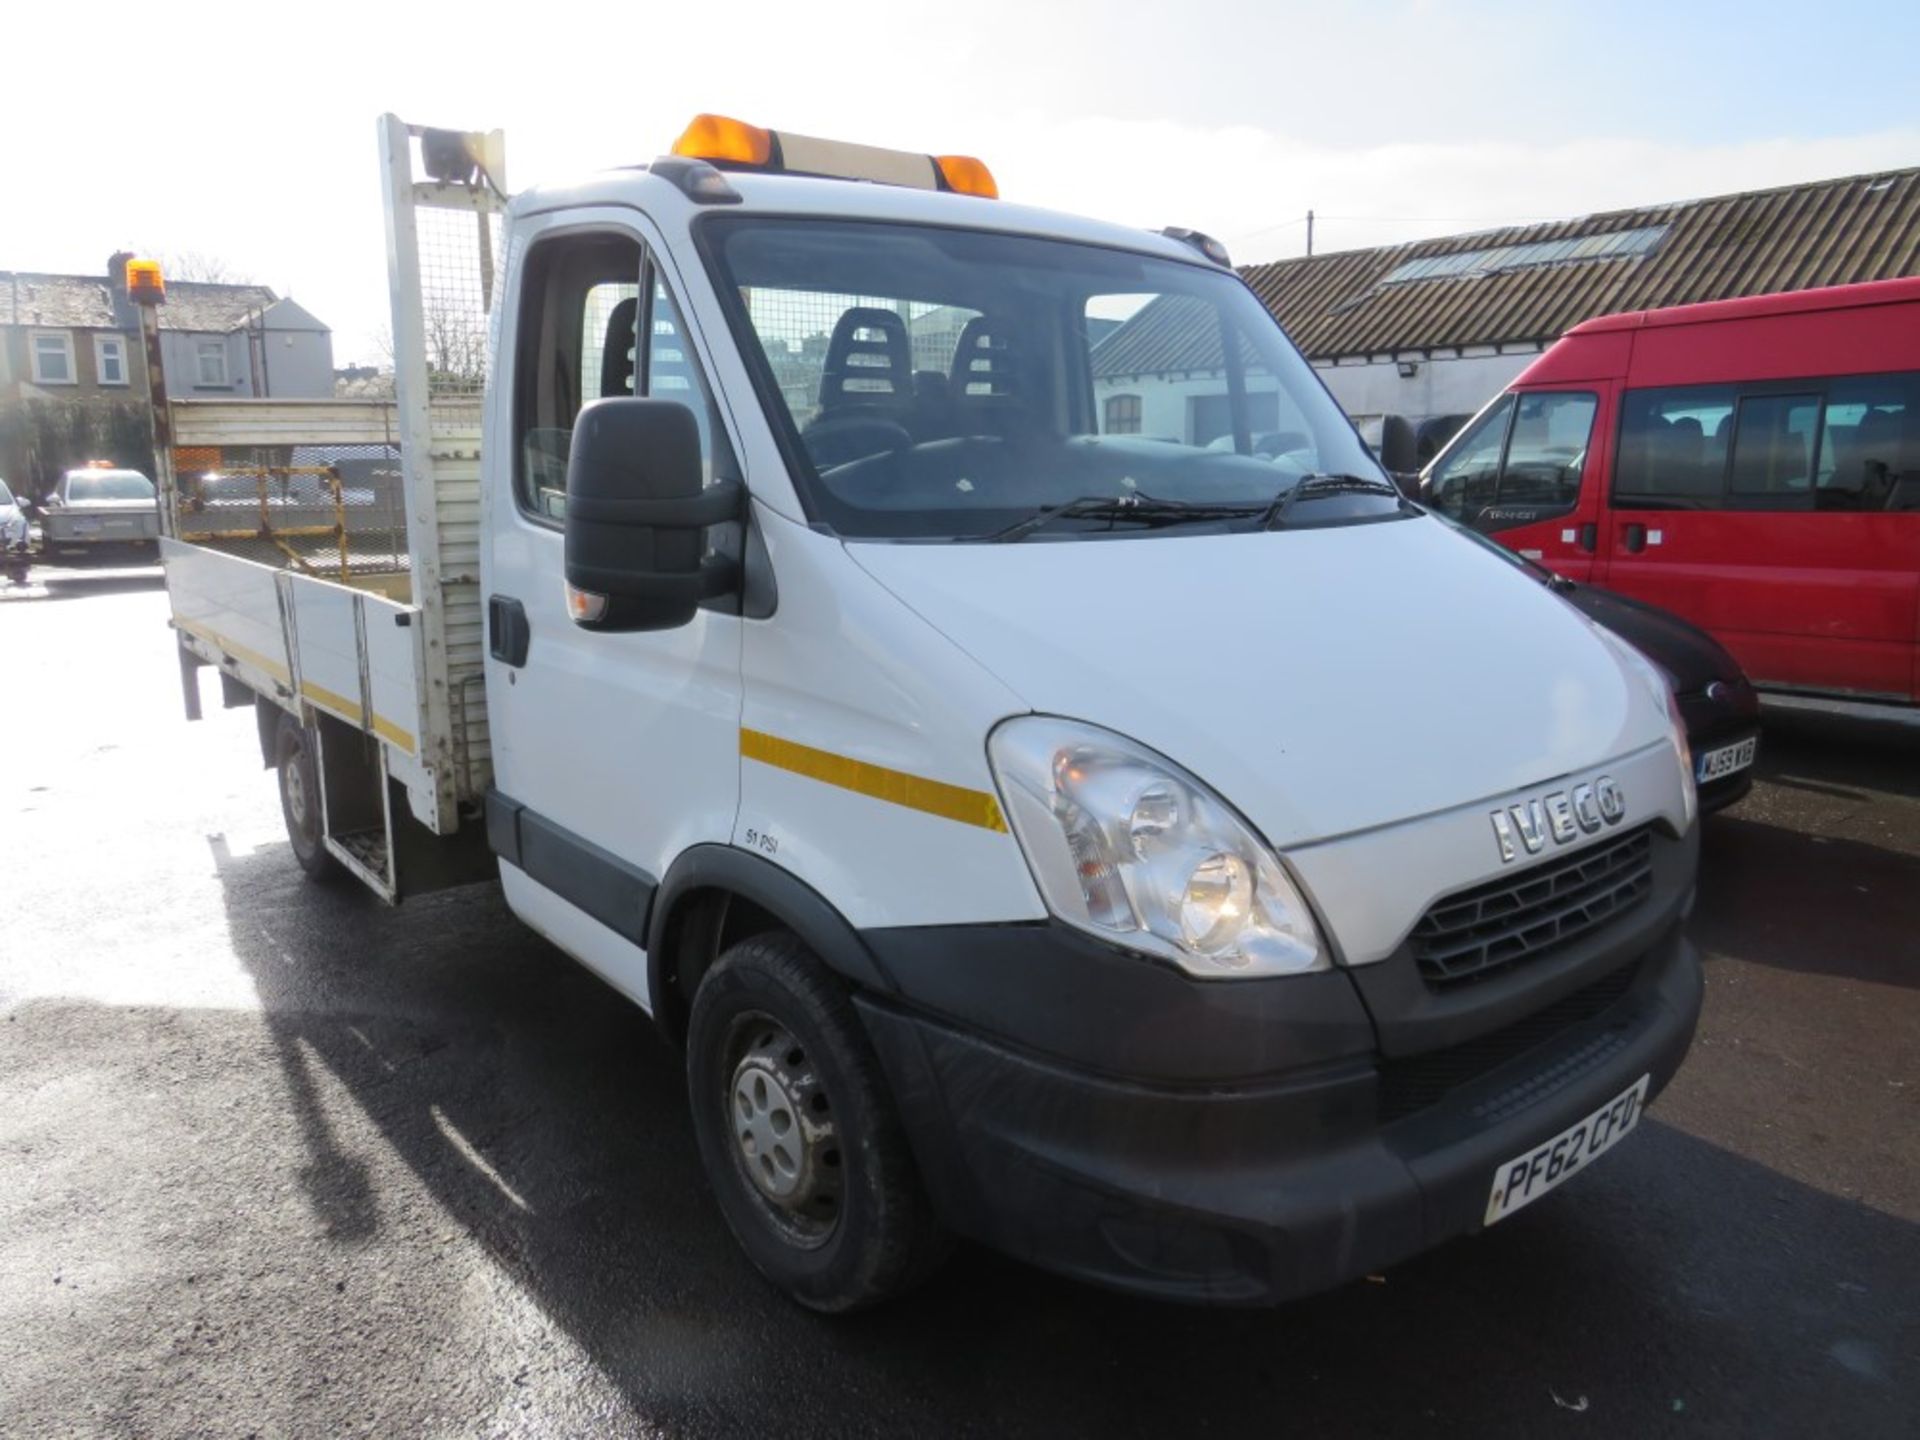 62 reg IVECO DAILY 35S13 DROPSIDE C/W TAIL LIFT, 1ST REG 02/13, TEST 03/22, 175886M WARRANTED, V5